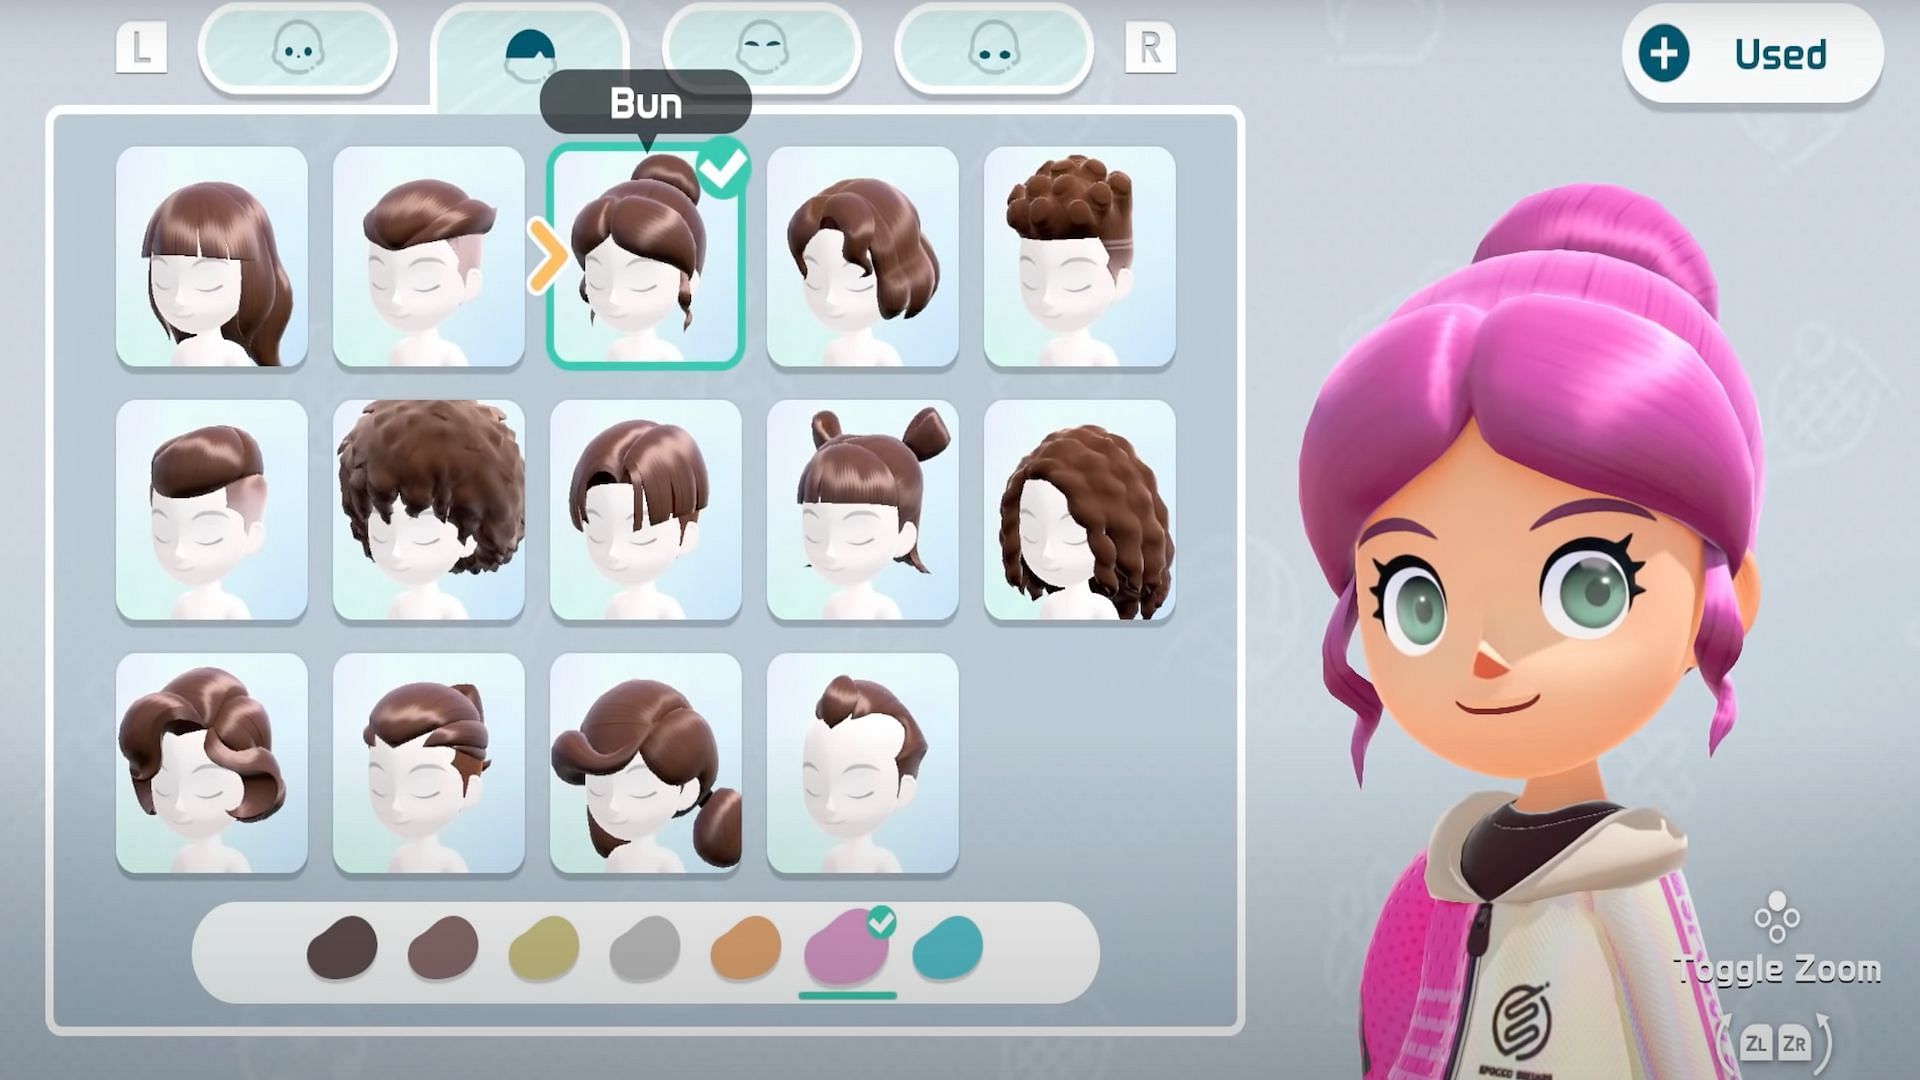 Players can customize different aspects of their characters to create a unique avatar (Image via Nintendo)